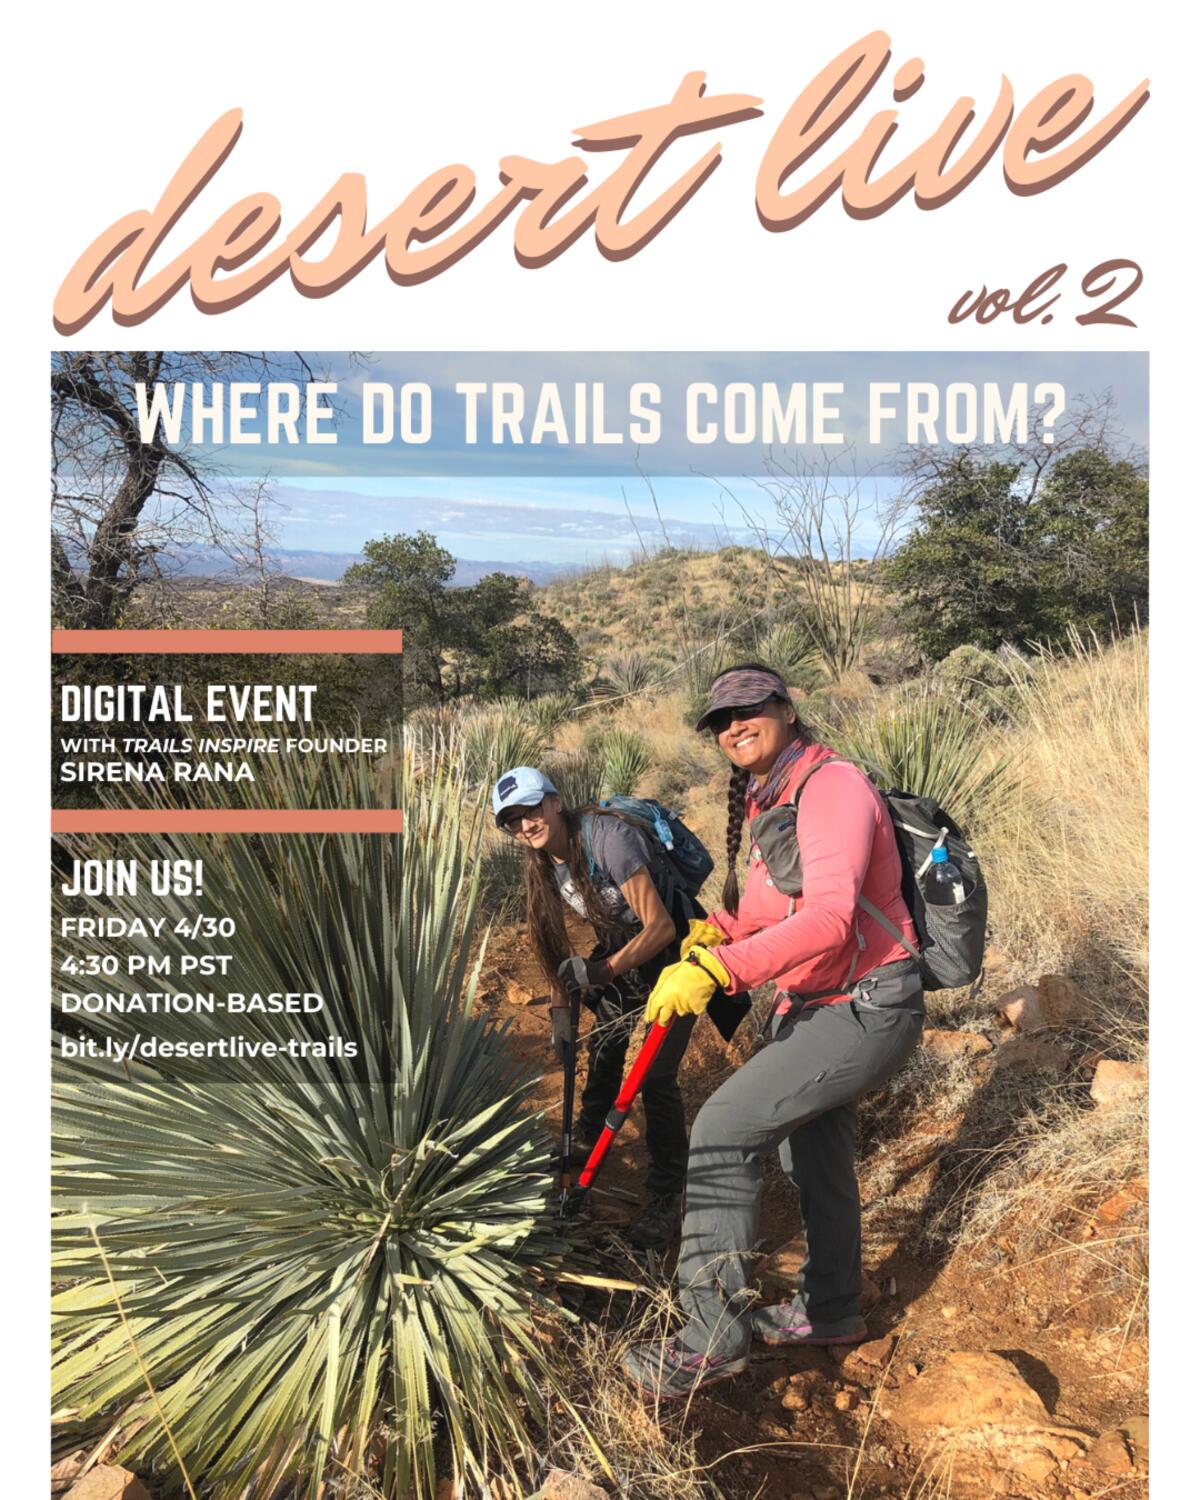 A flyer for a Desert Live event on where trails come from features two people in a desert landscape.